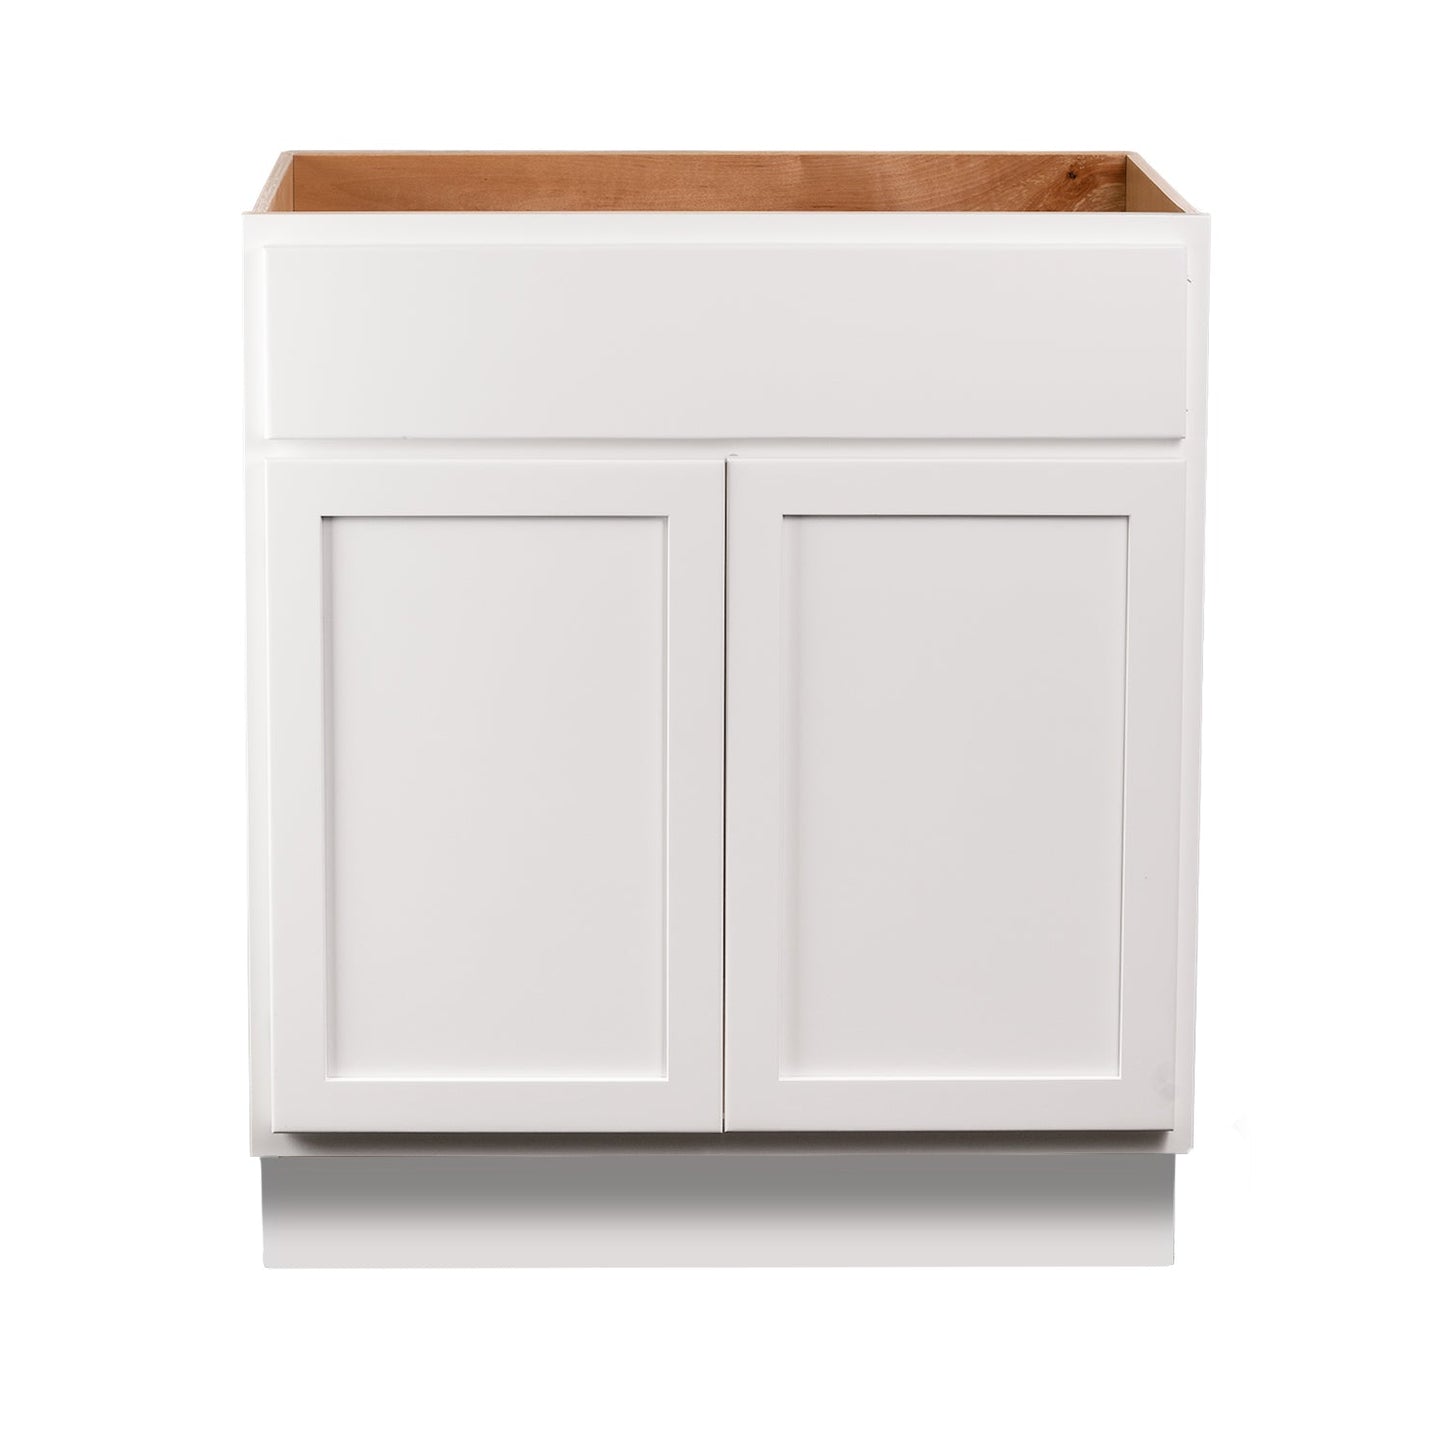 Quicklock RTA (Ready-to-Assemble) Pure White Vanity Base Cabinet | 30"Wx34.5"Hx21"D